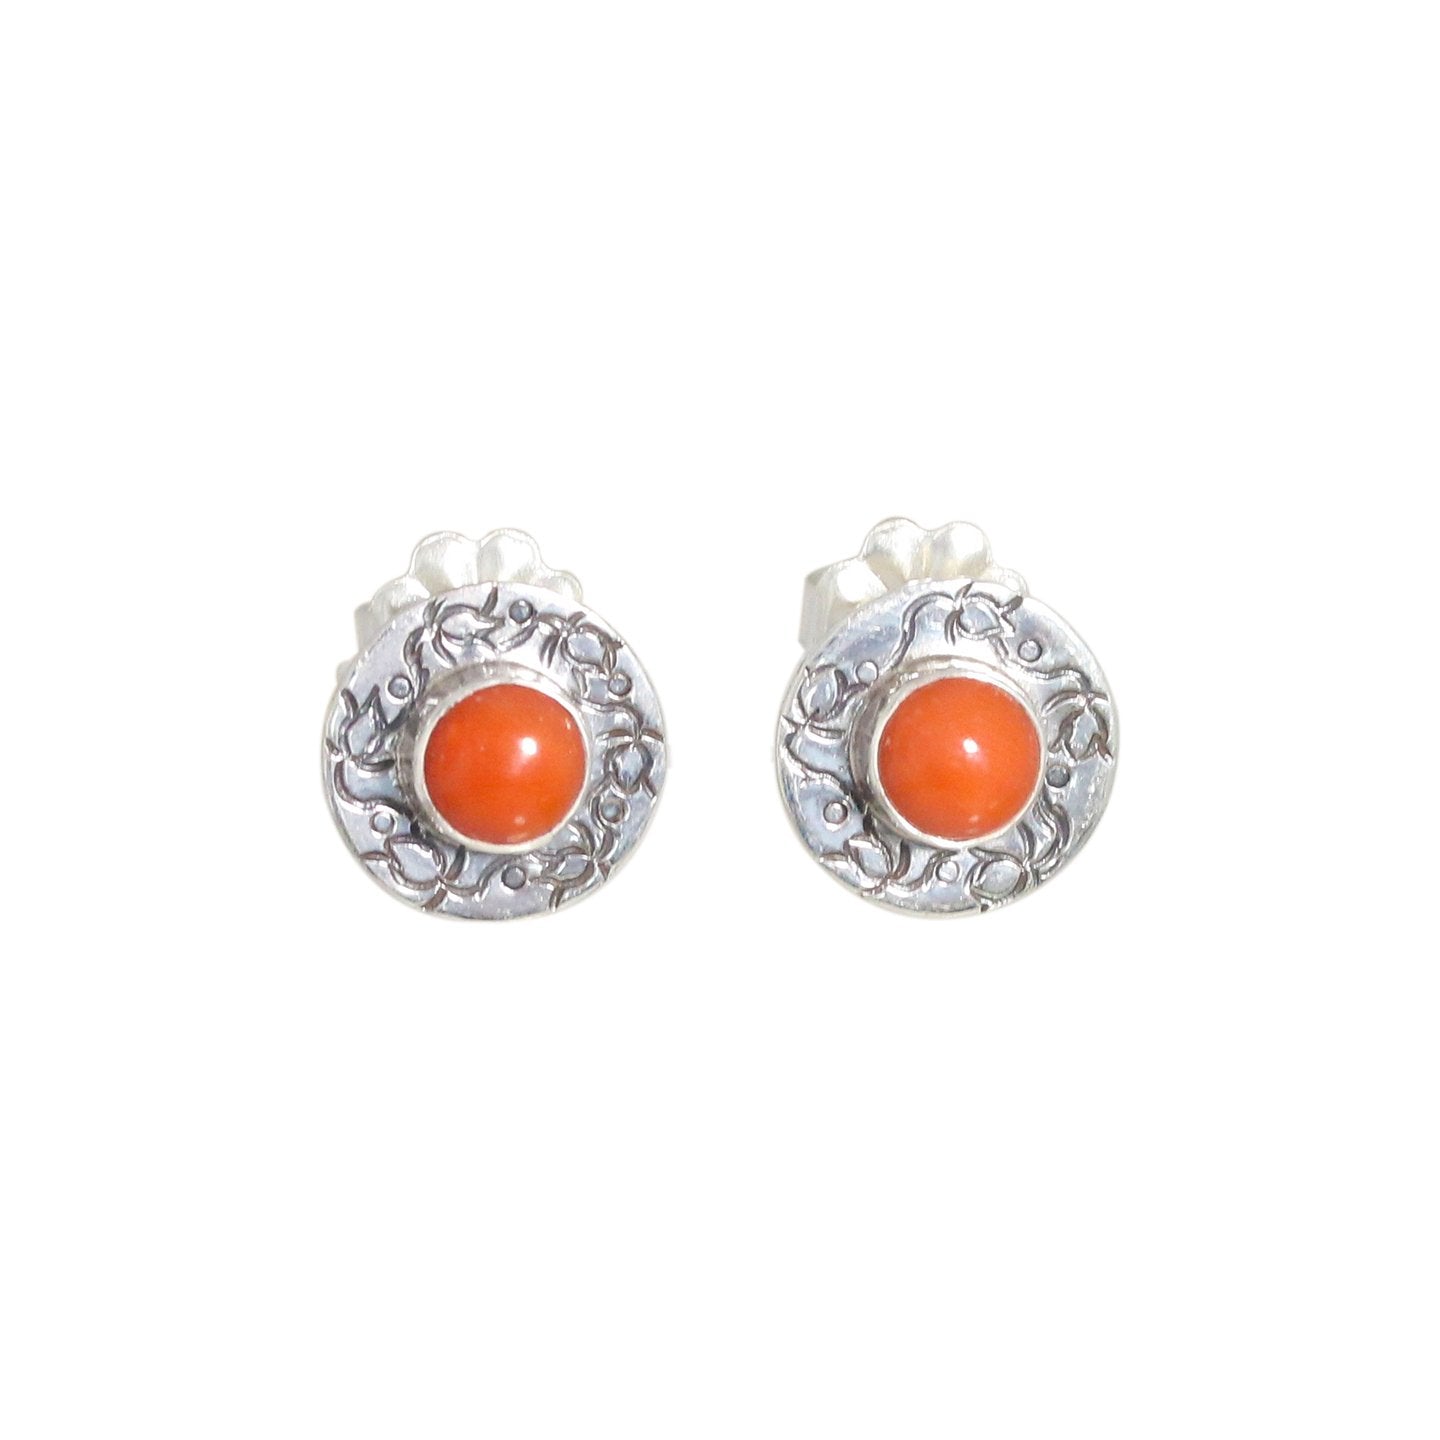 Red Italian Coral Earrings Sterling Style Posts 7Mm Round, -NewWorldGems